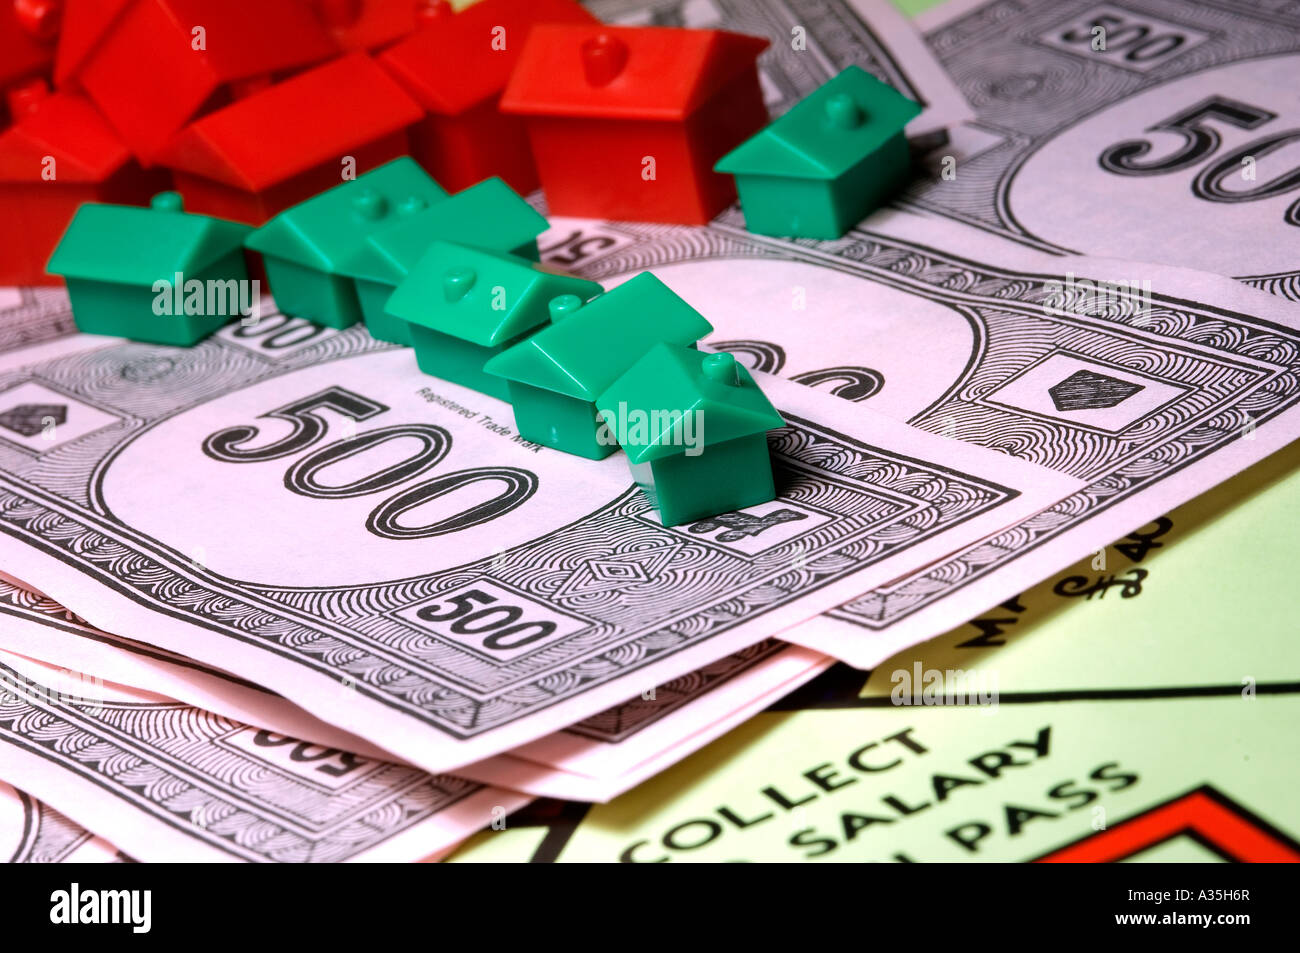 Close up of monopoly money and houses business concept cash note notes banknote banknotes Stock Photo